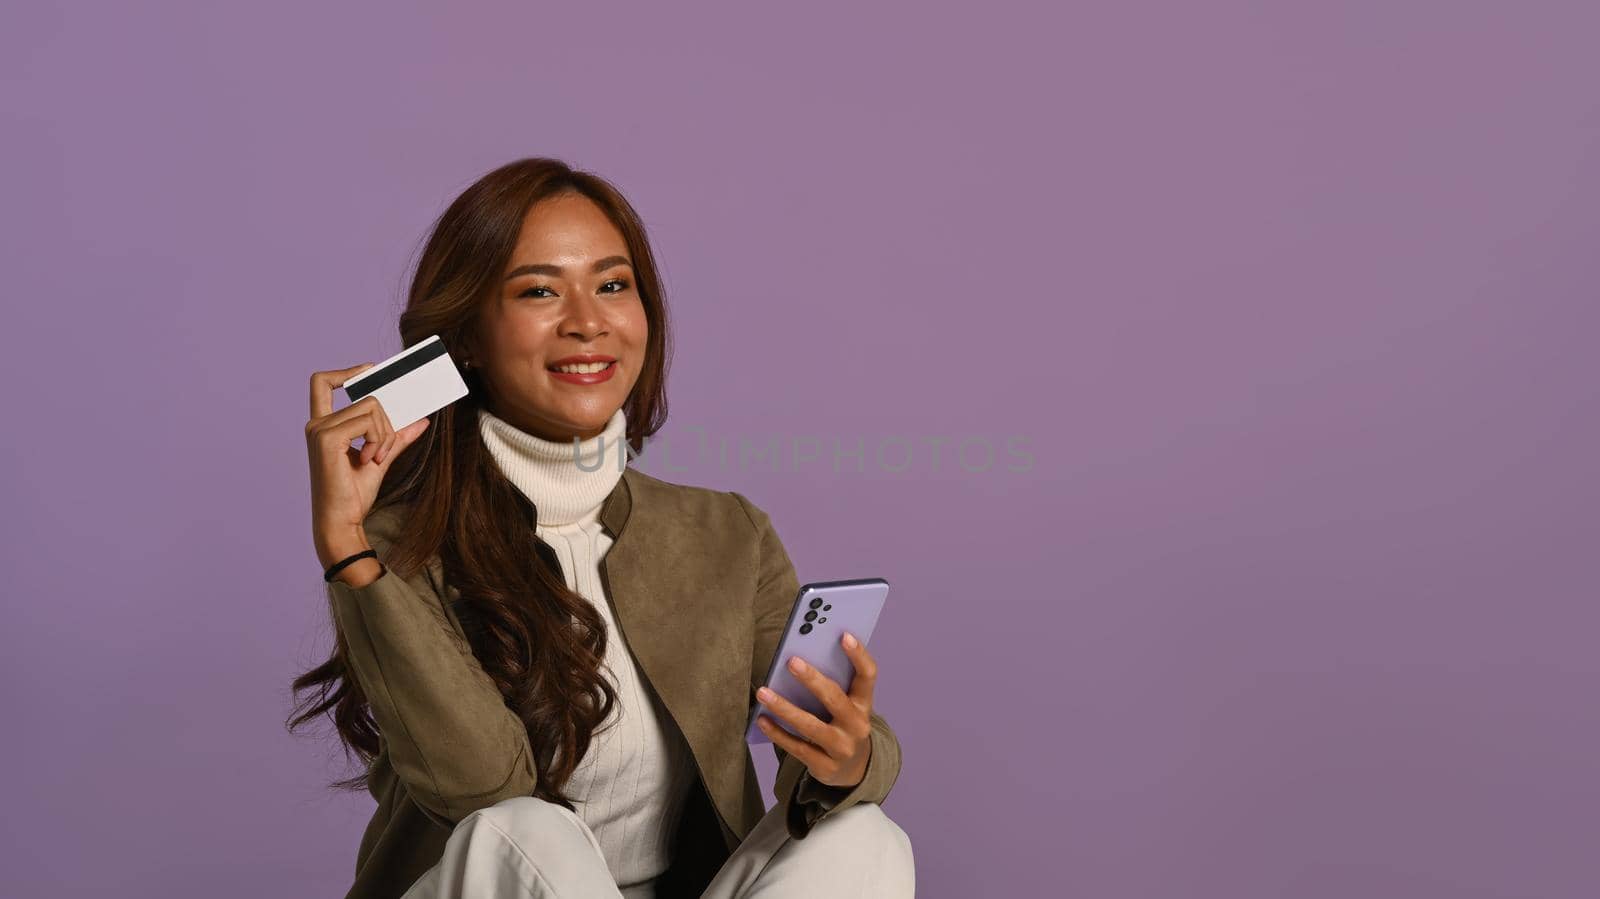 Studio photo of smiling young woman holding mobile phone and credit card sitting on purple background.